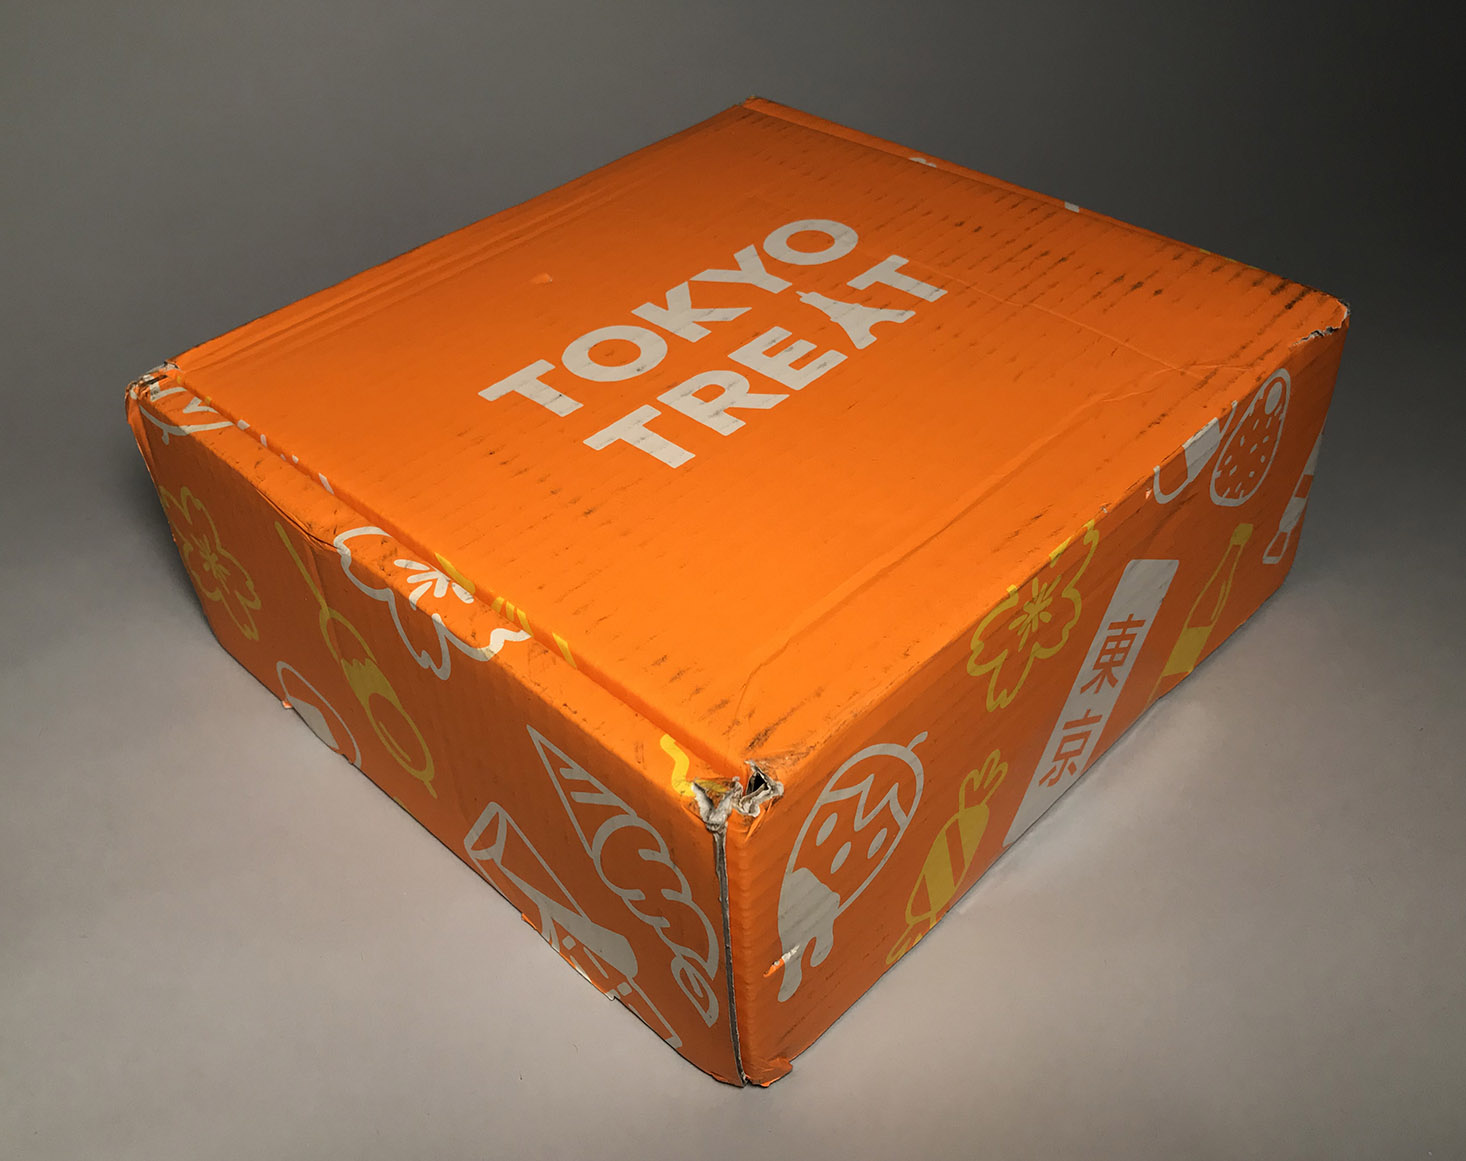 TokyoTreat Subscription Box Review – March 2018